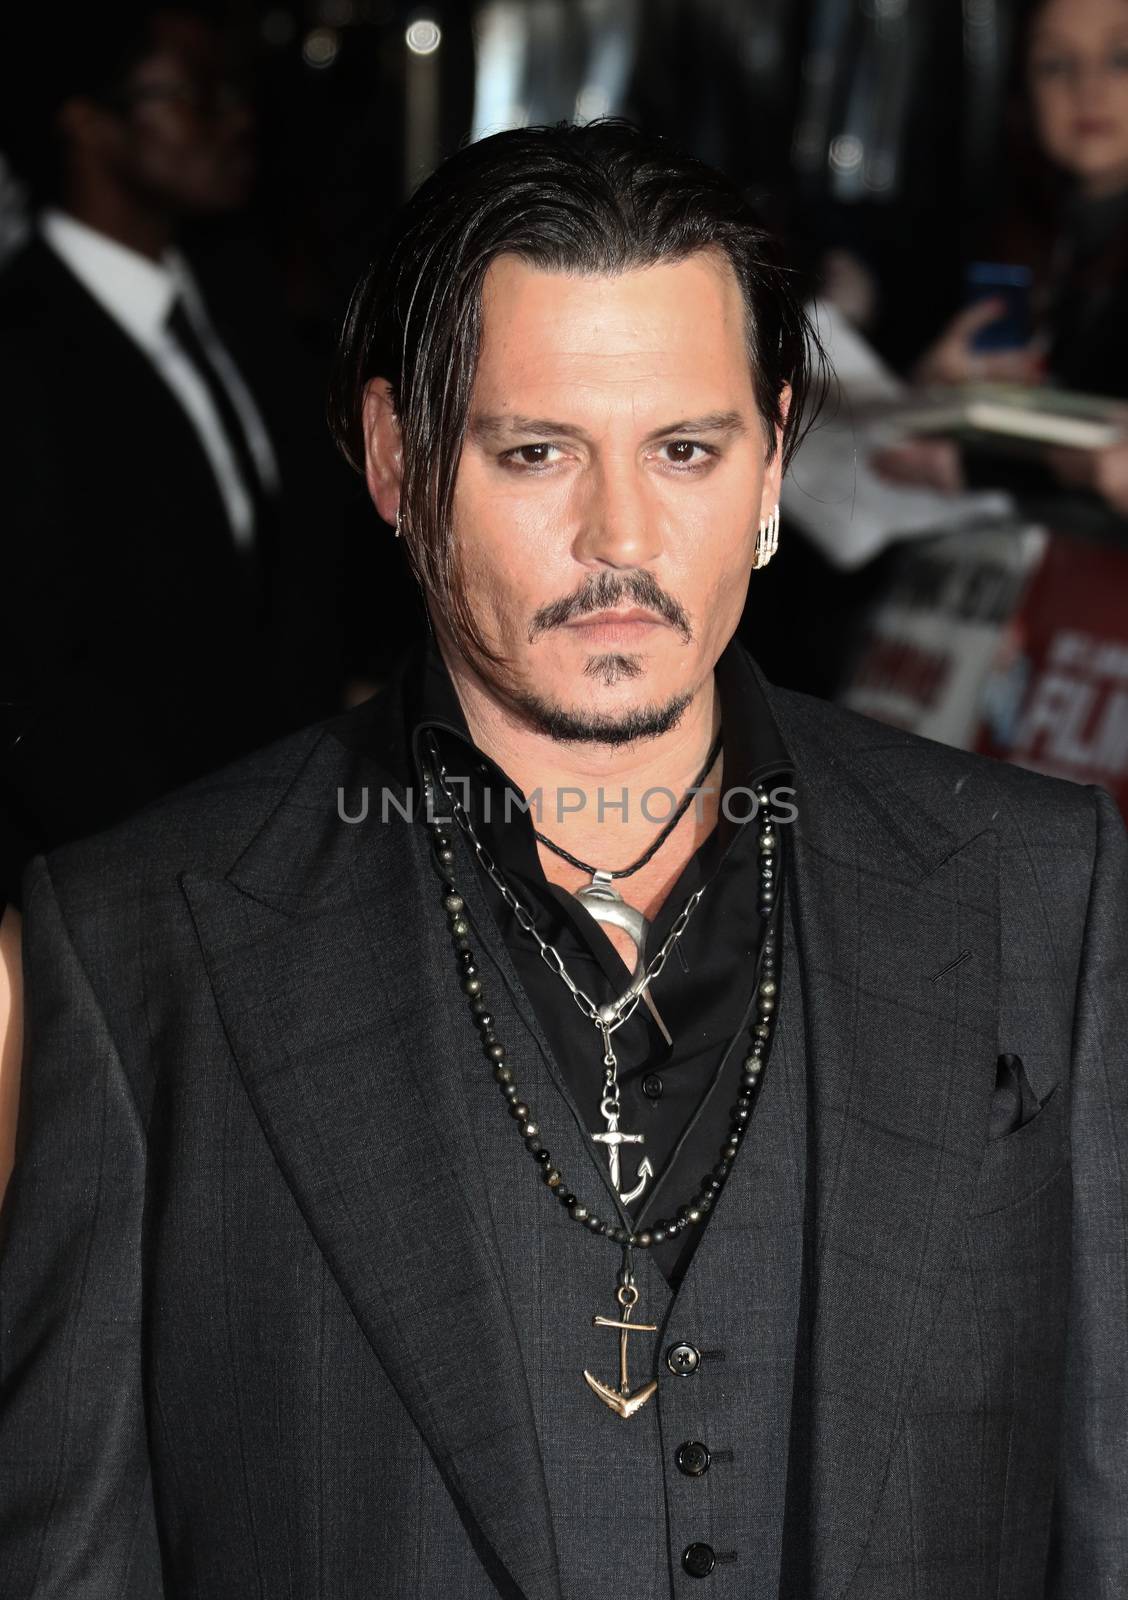 UNITED KINGDOM, London: Johnny Depp attends the BFI London Film Festival screening of Black Mass at Odeon Leicester Square in London on October 11, 2015. 